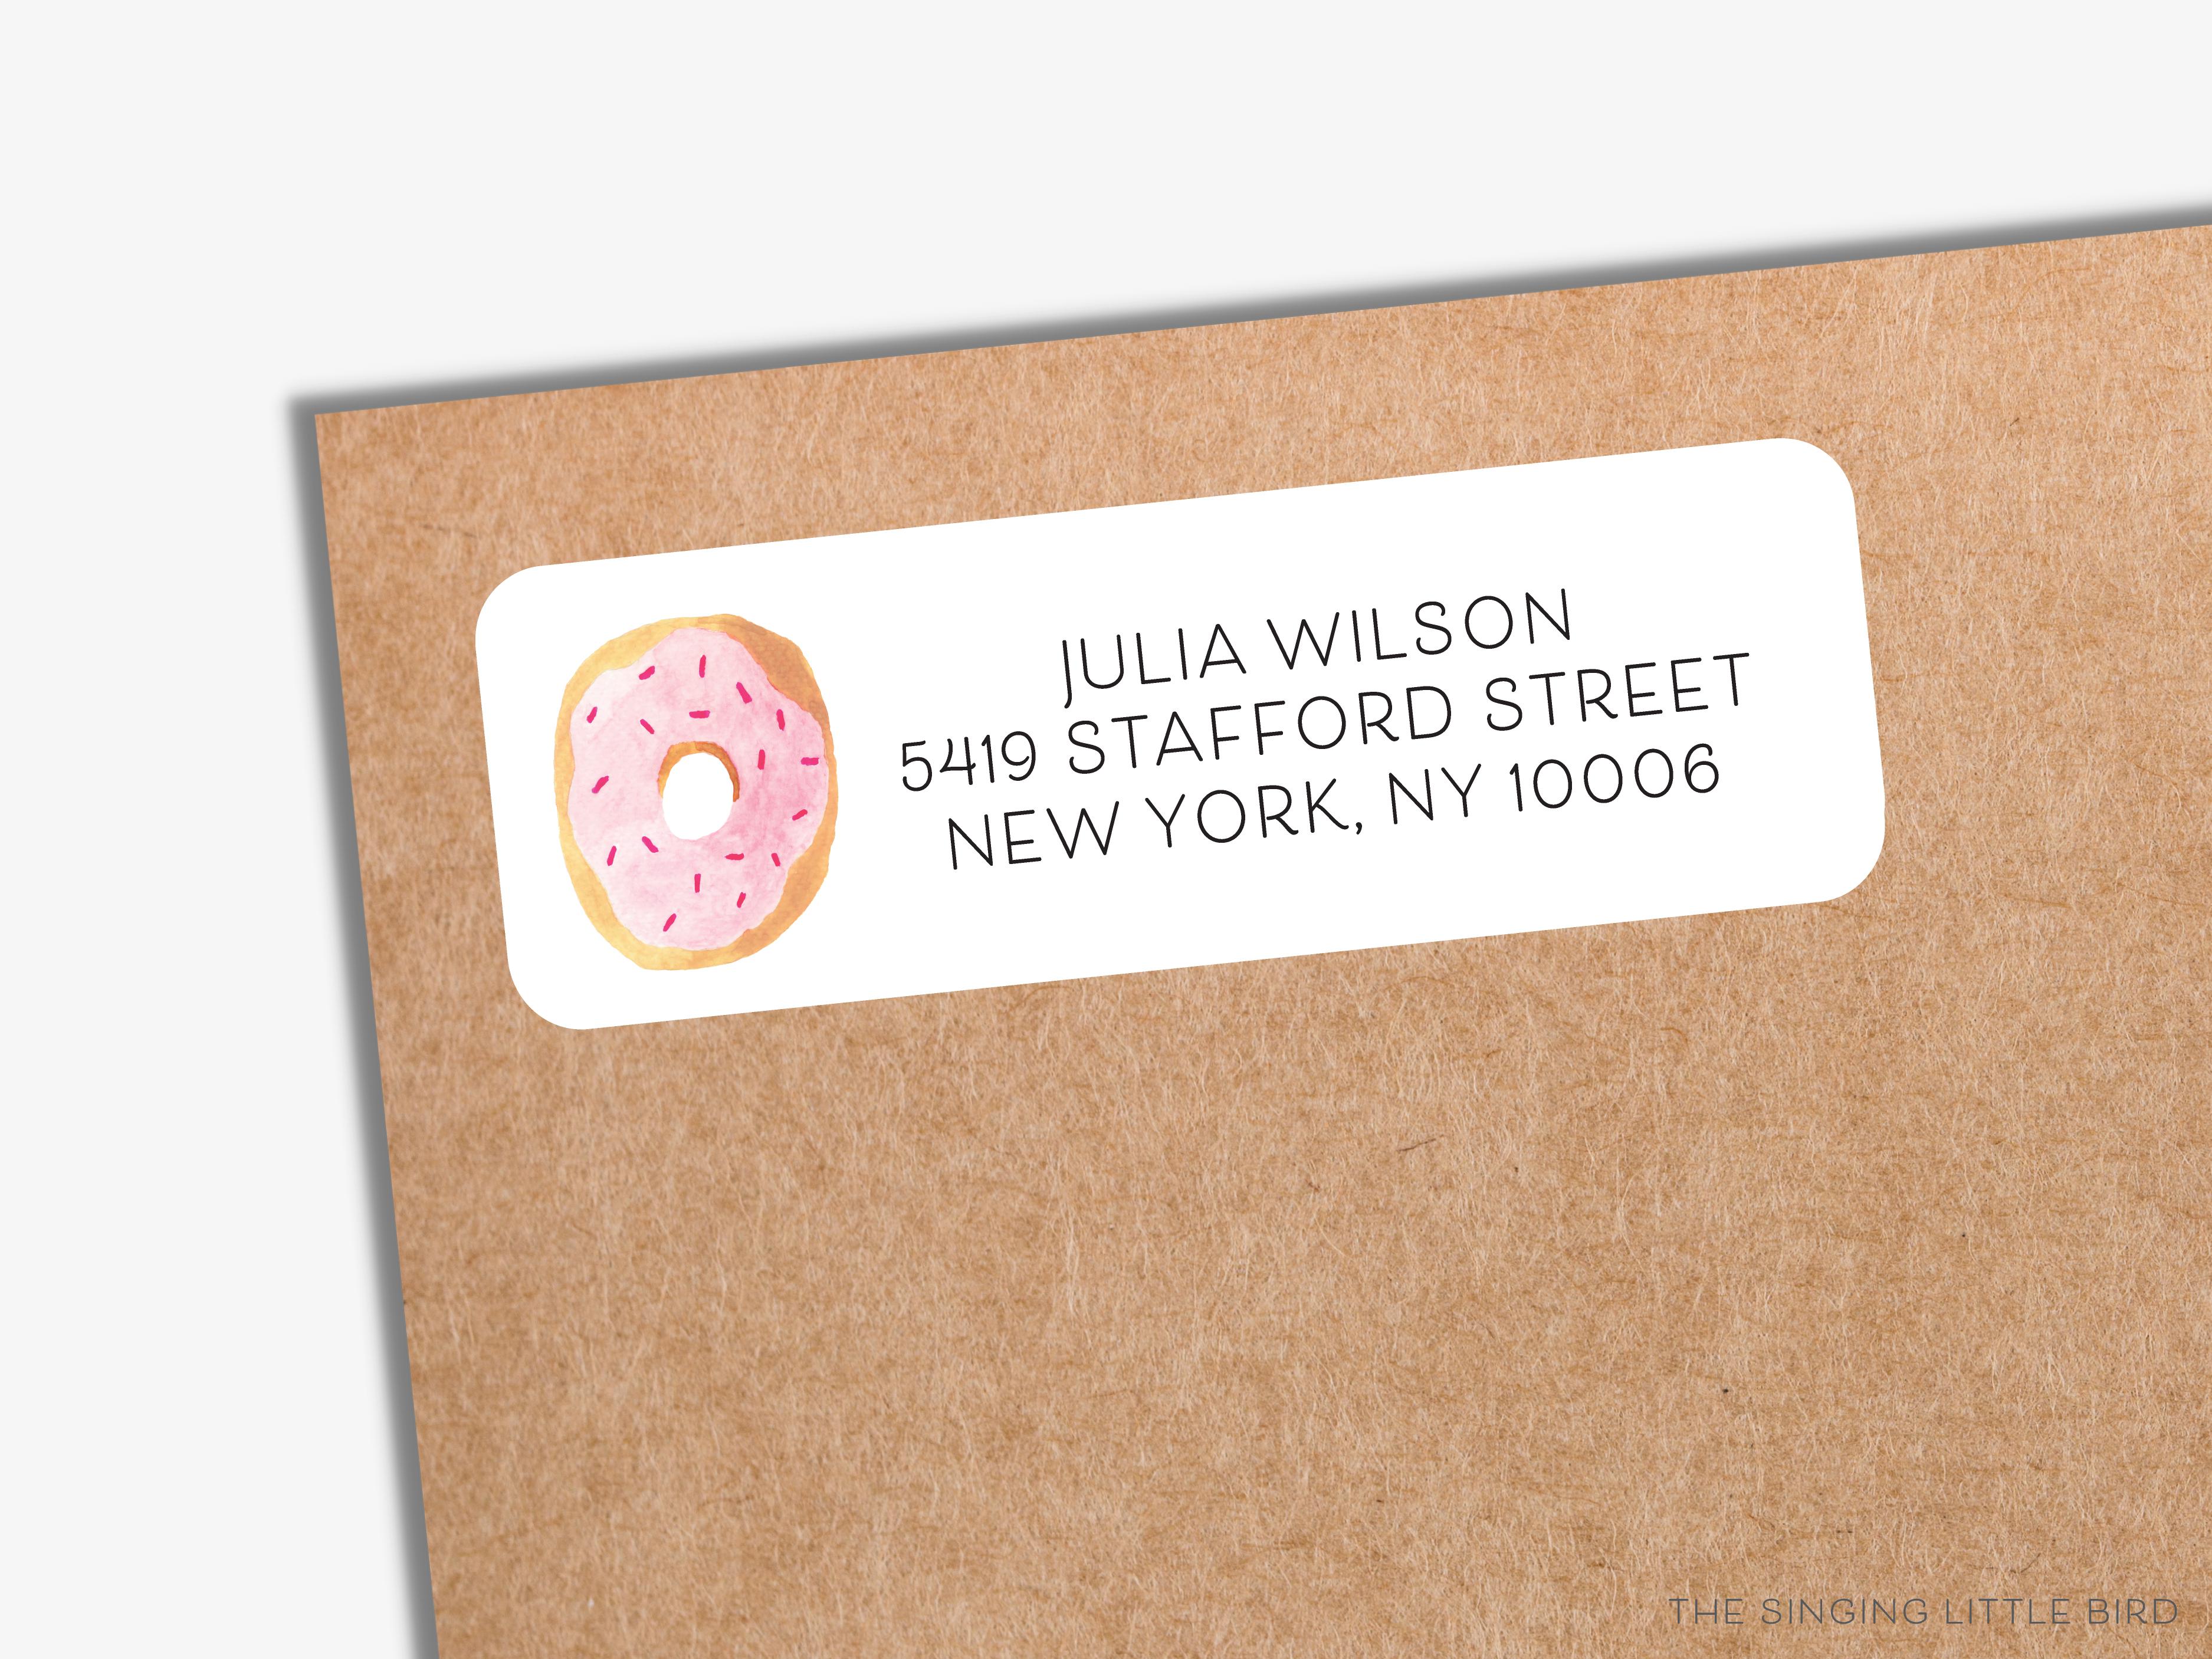 Donut Return Address Labels- These personalized return address labels are 2.625" x 1" and feature our hand-painted watercolor donut, printed in the USA on beautiful matte finish labels. These make great gifts for yourself or the sweet tooth lover. -The Singing Little Bird